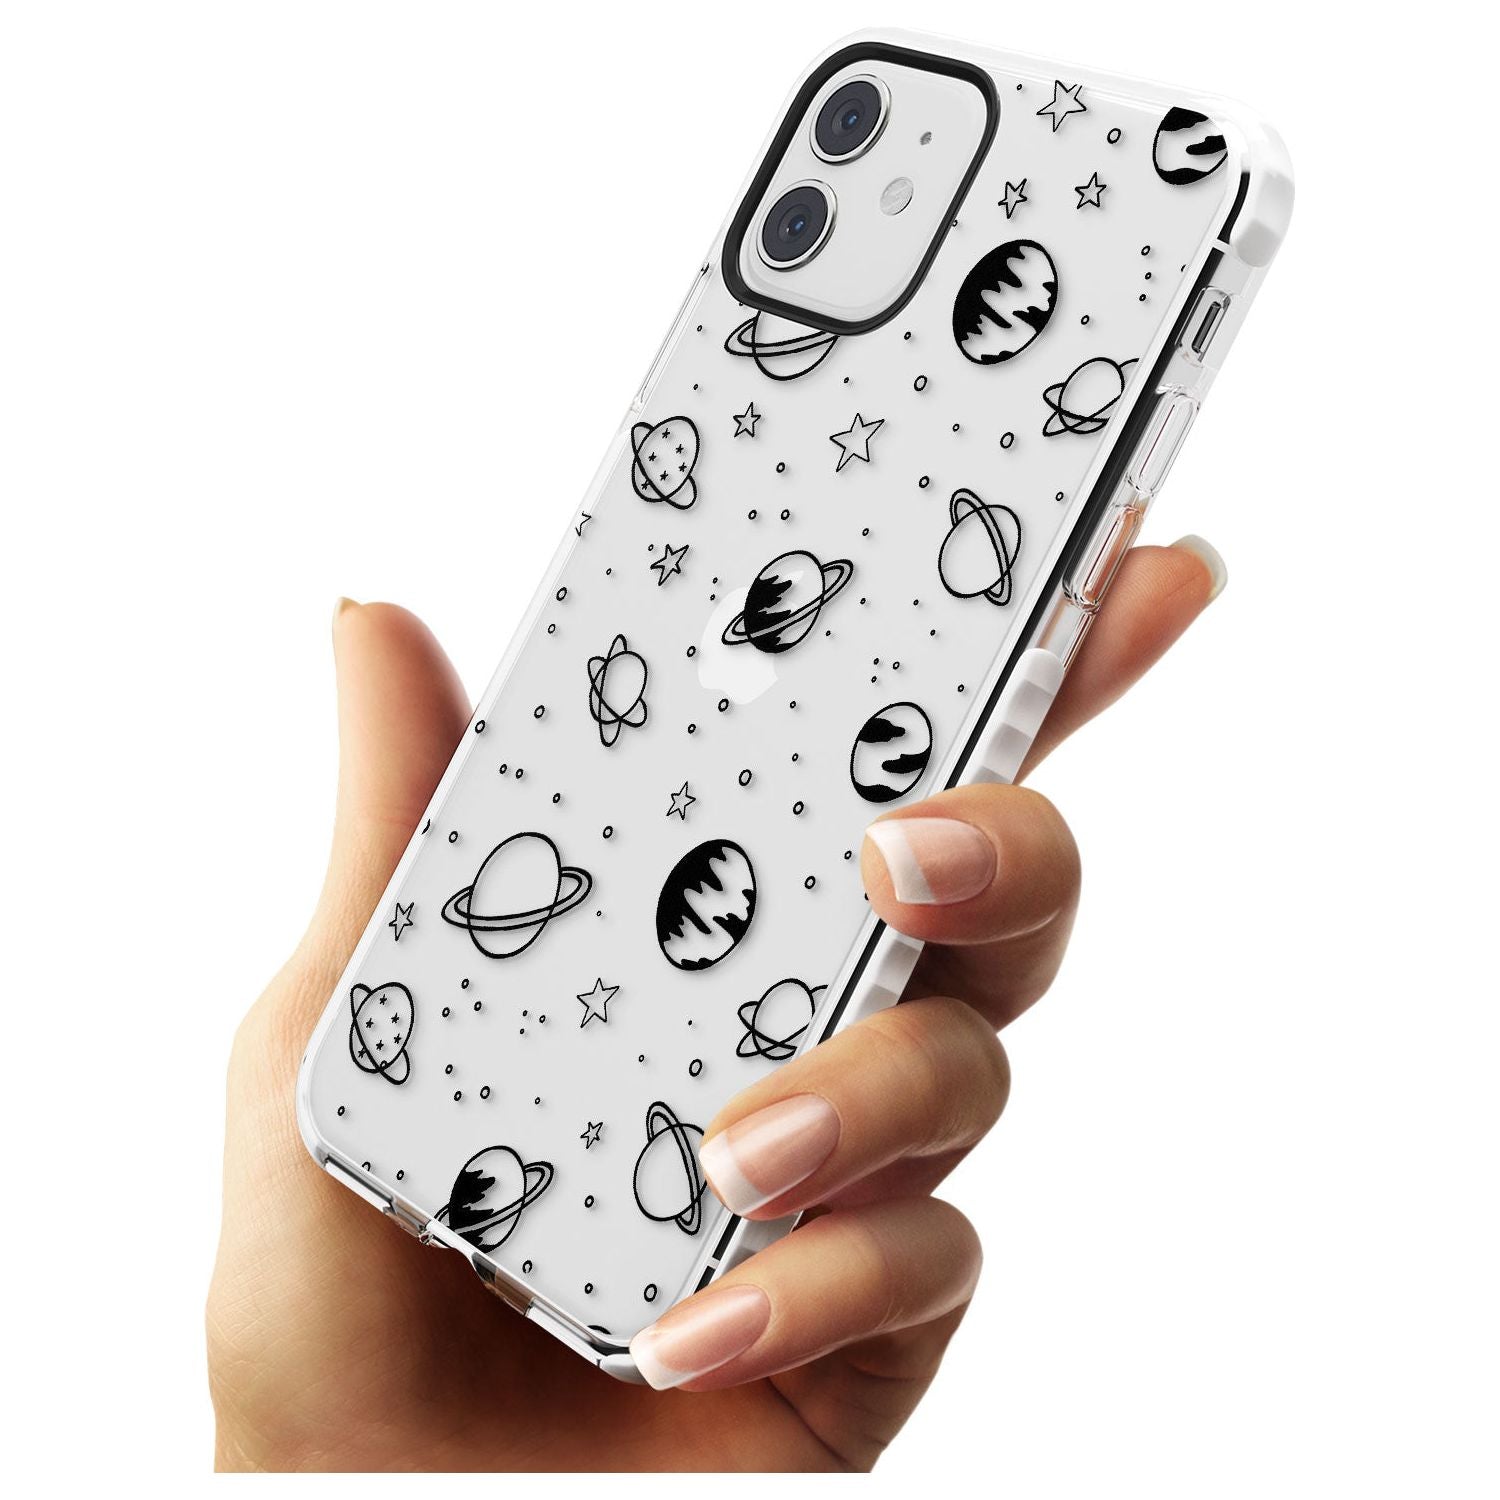 Outer Space Outlines: Black on Clear Slim TPU Phone Case for iPhone 11